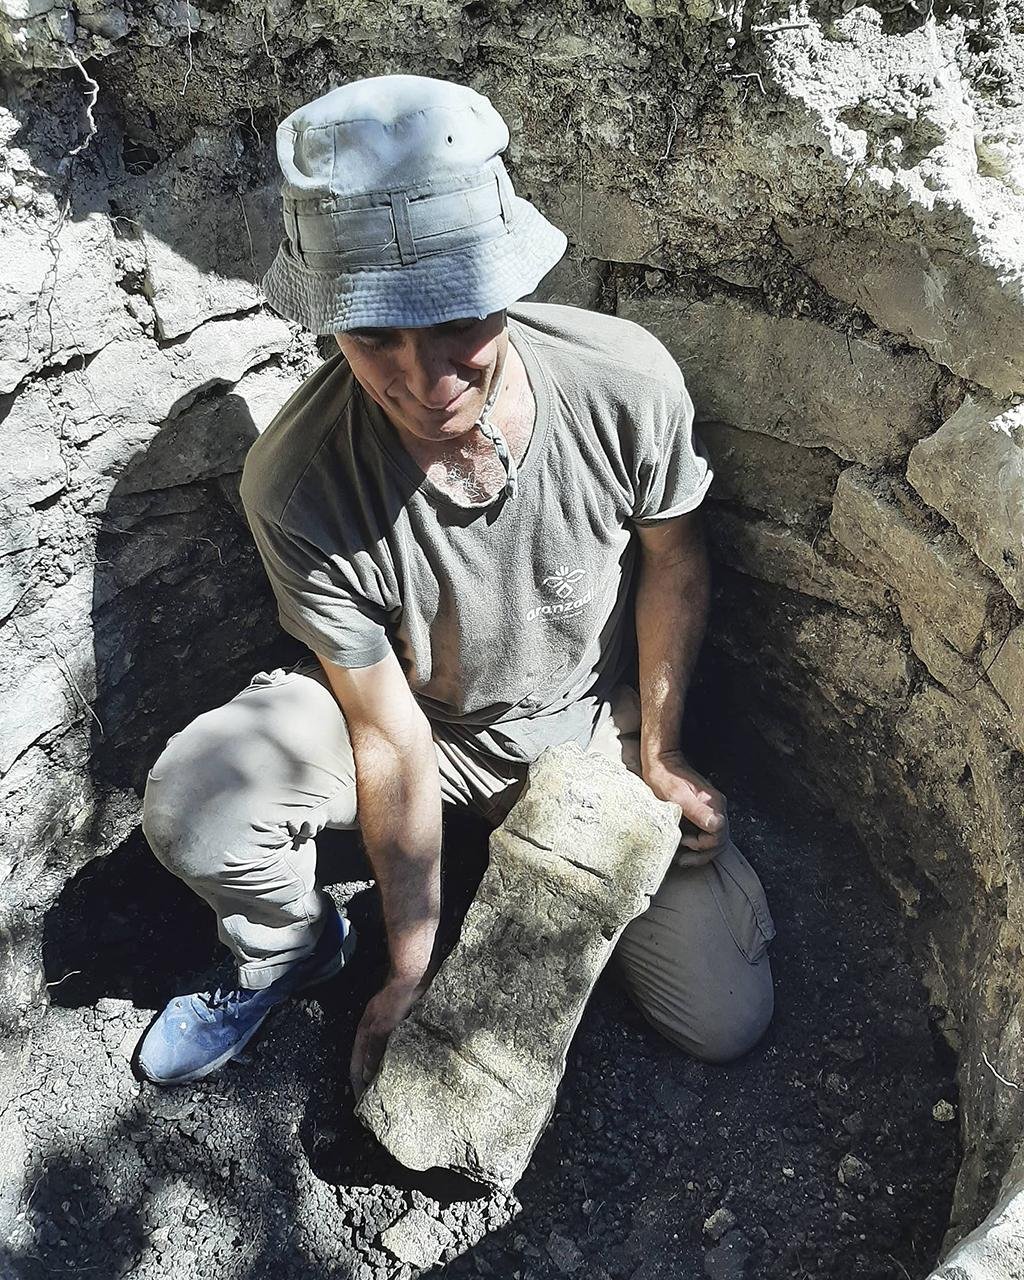 Archaeologists uncover 1st-century votive altar on Mount Arriaundi, Spain